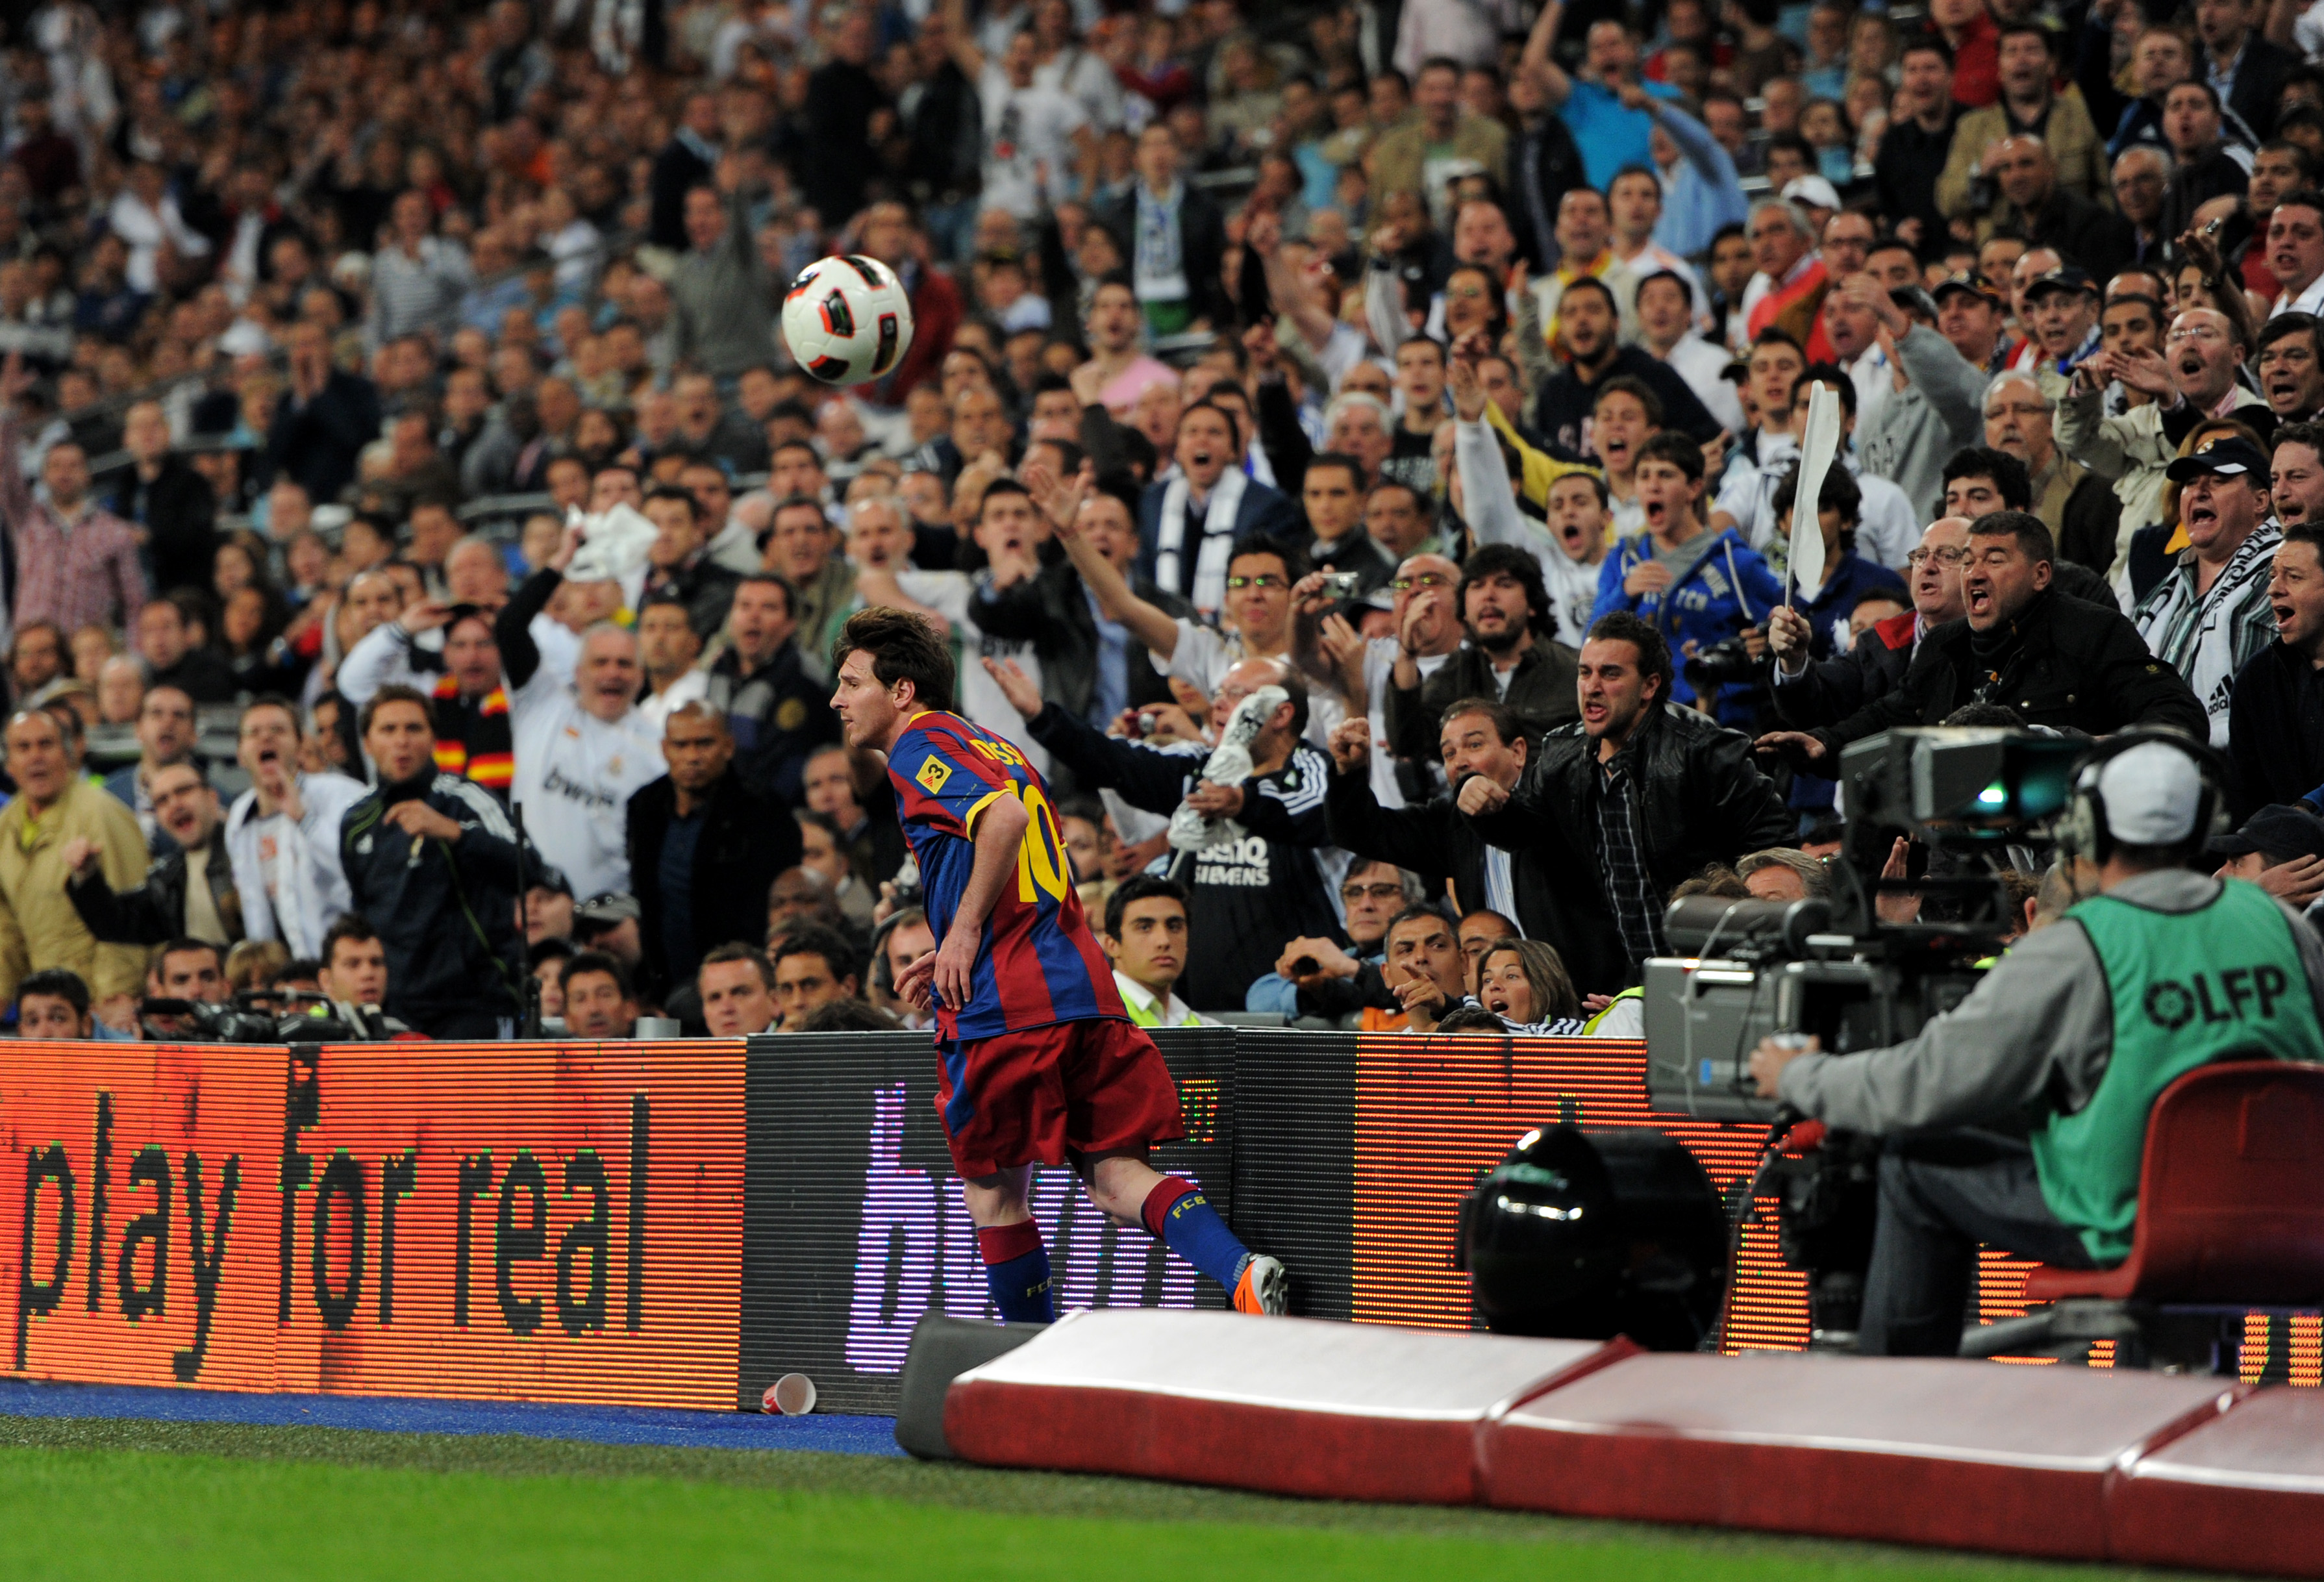 MADRID, SPAIN - APRIL 16:  Real Madrid fans react against Lionel Messi of Barcelona during the la Liga match between Real Madrid and Barcelona at Estadio Santiago Bernabeu on April 16, 2011 in Madrid, Spain.  (Photo by Jasper Juinen/Getty Images)